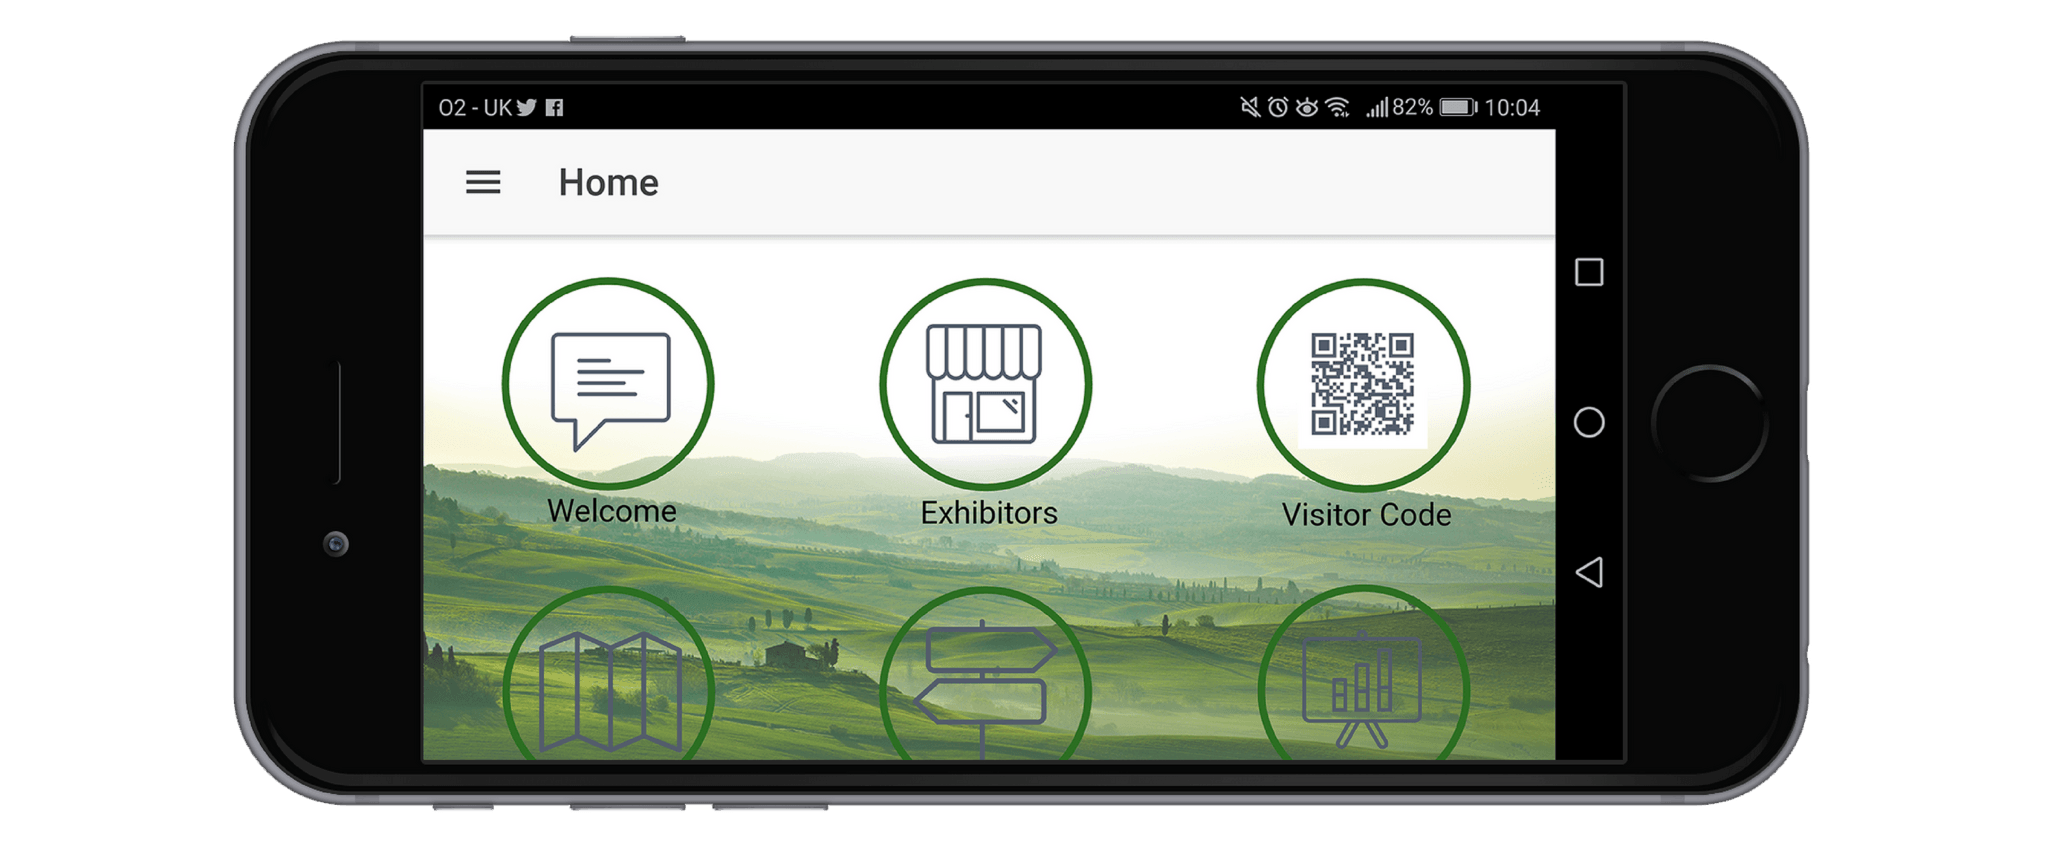 9 great reasons to download the LAMMA app